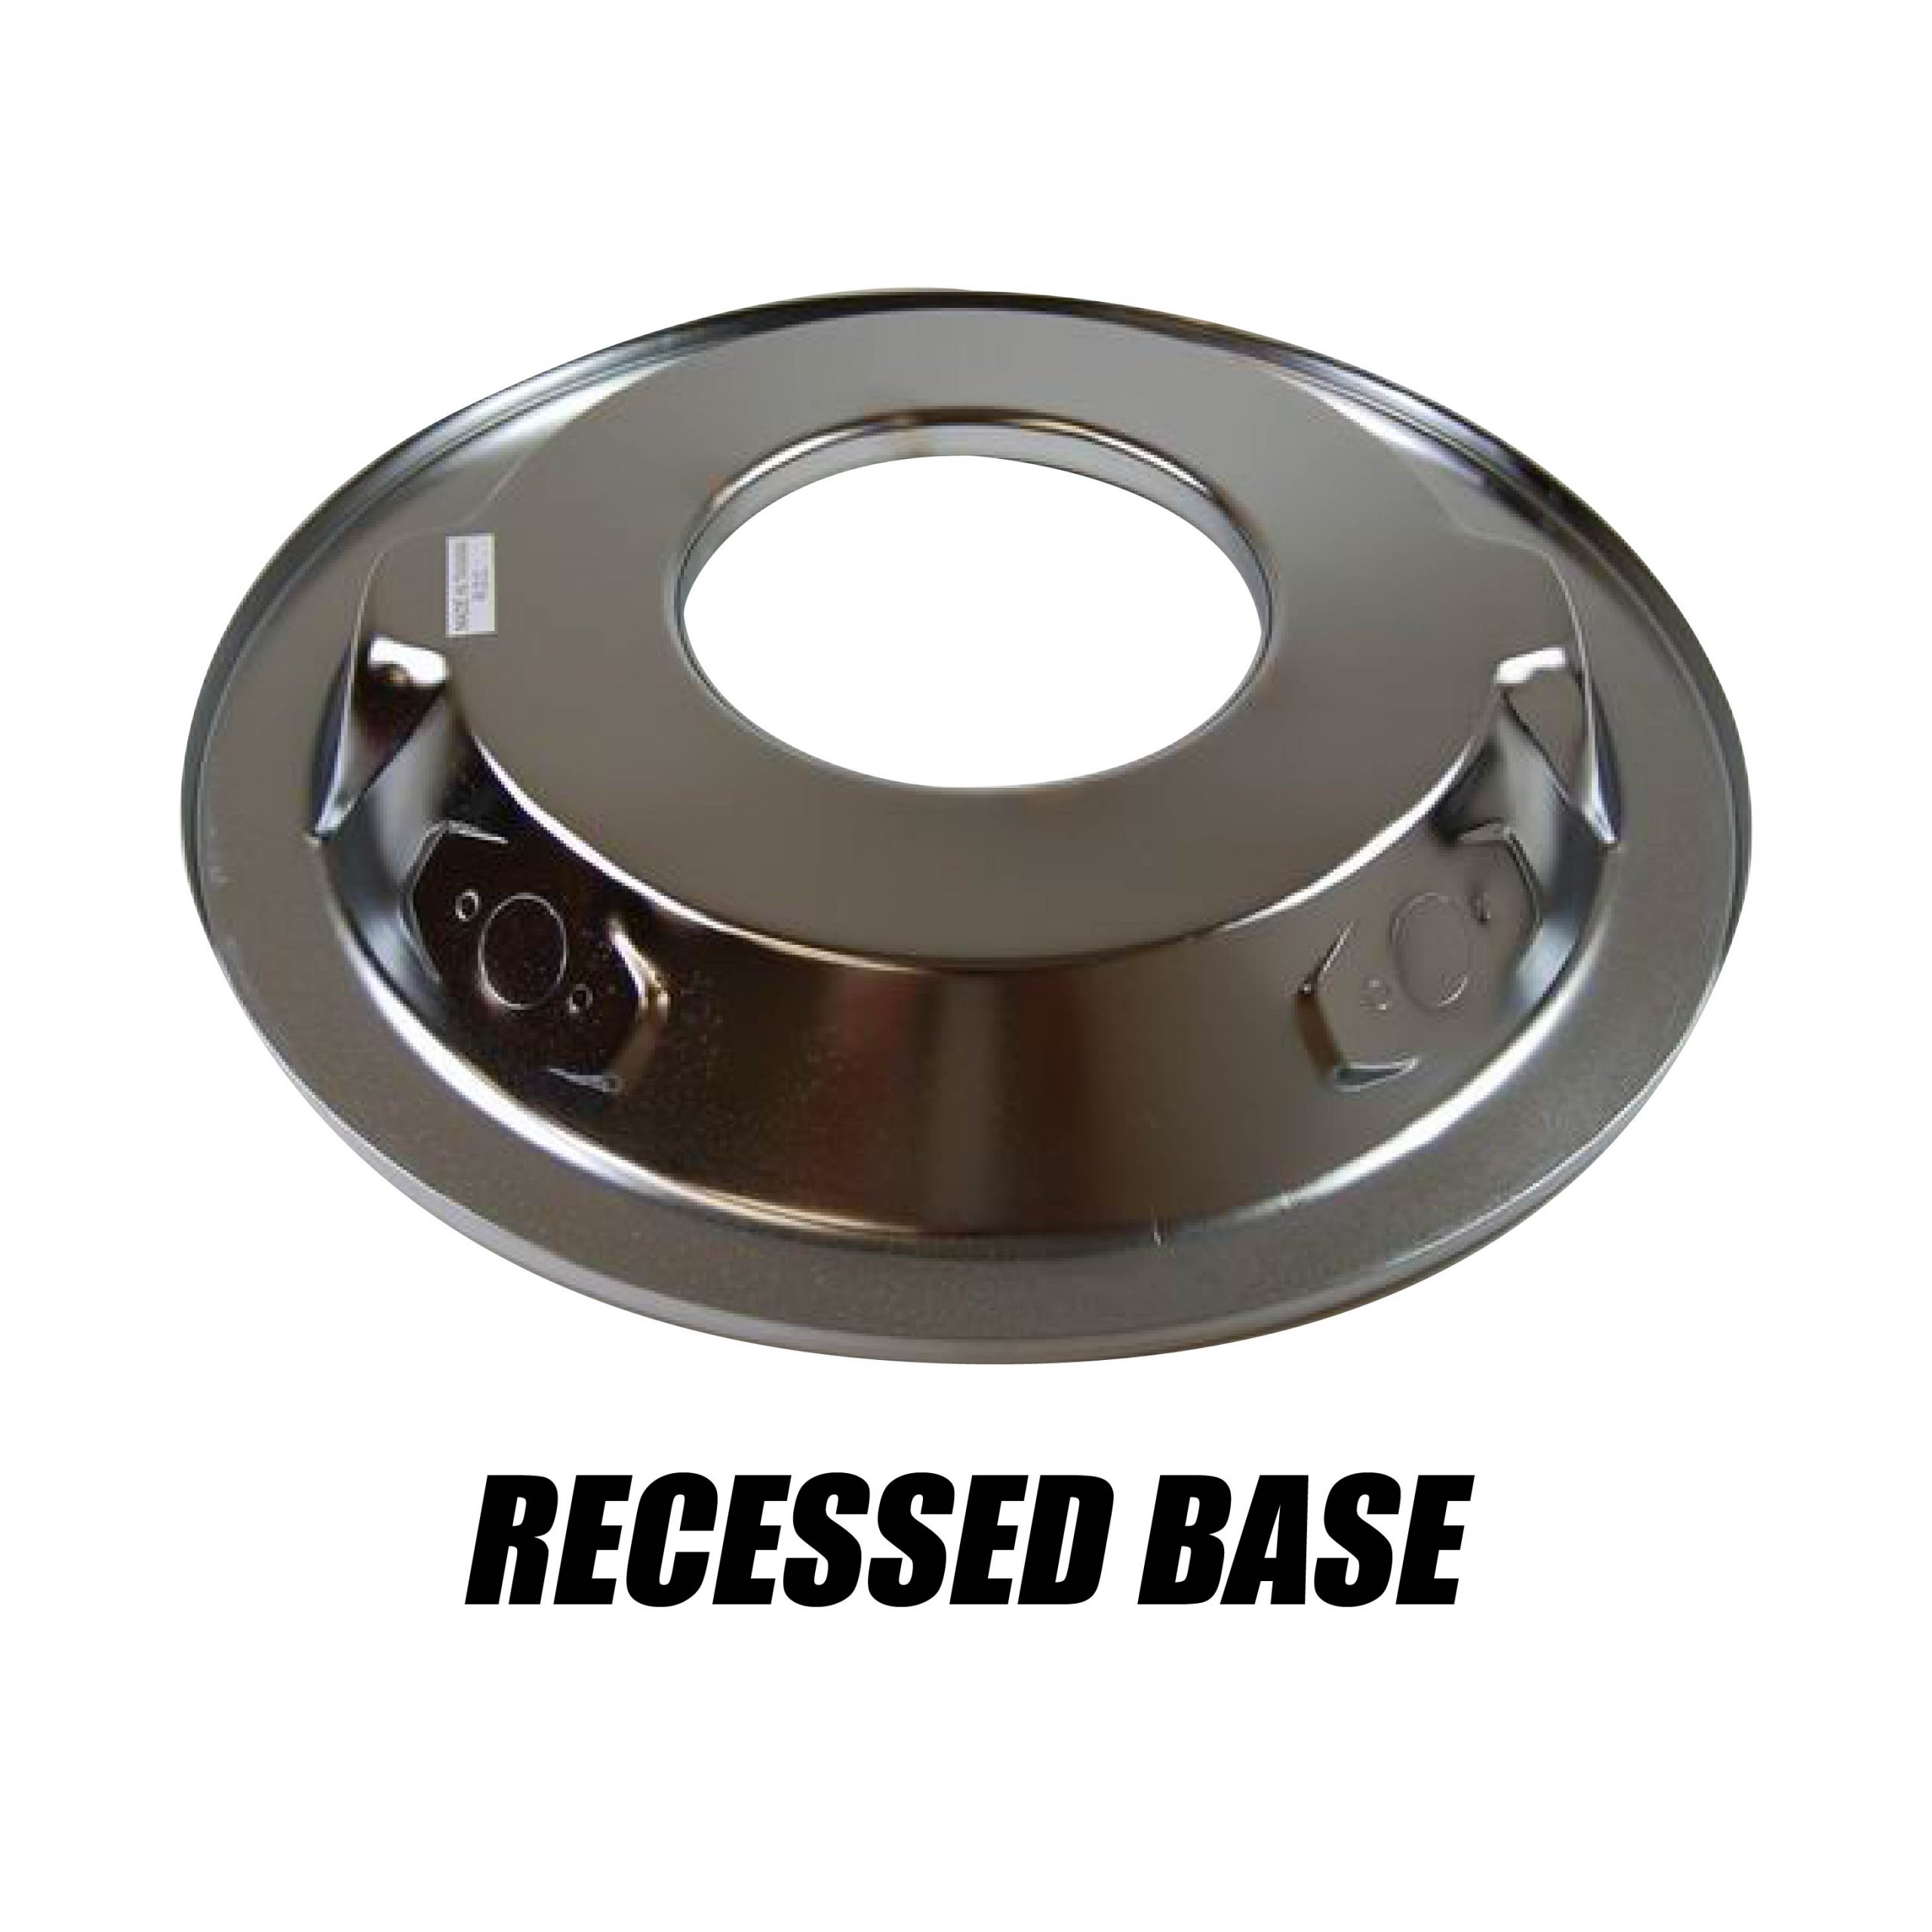 Recessed-Base-scaled